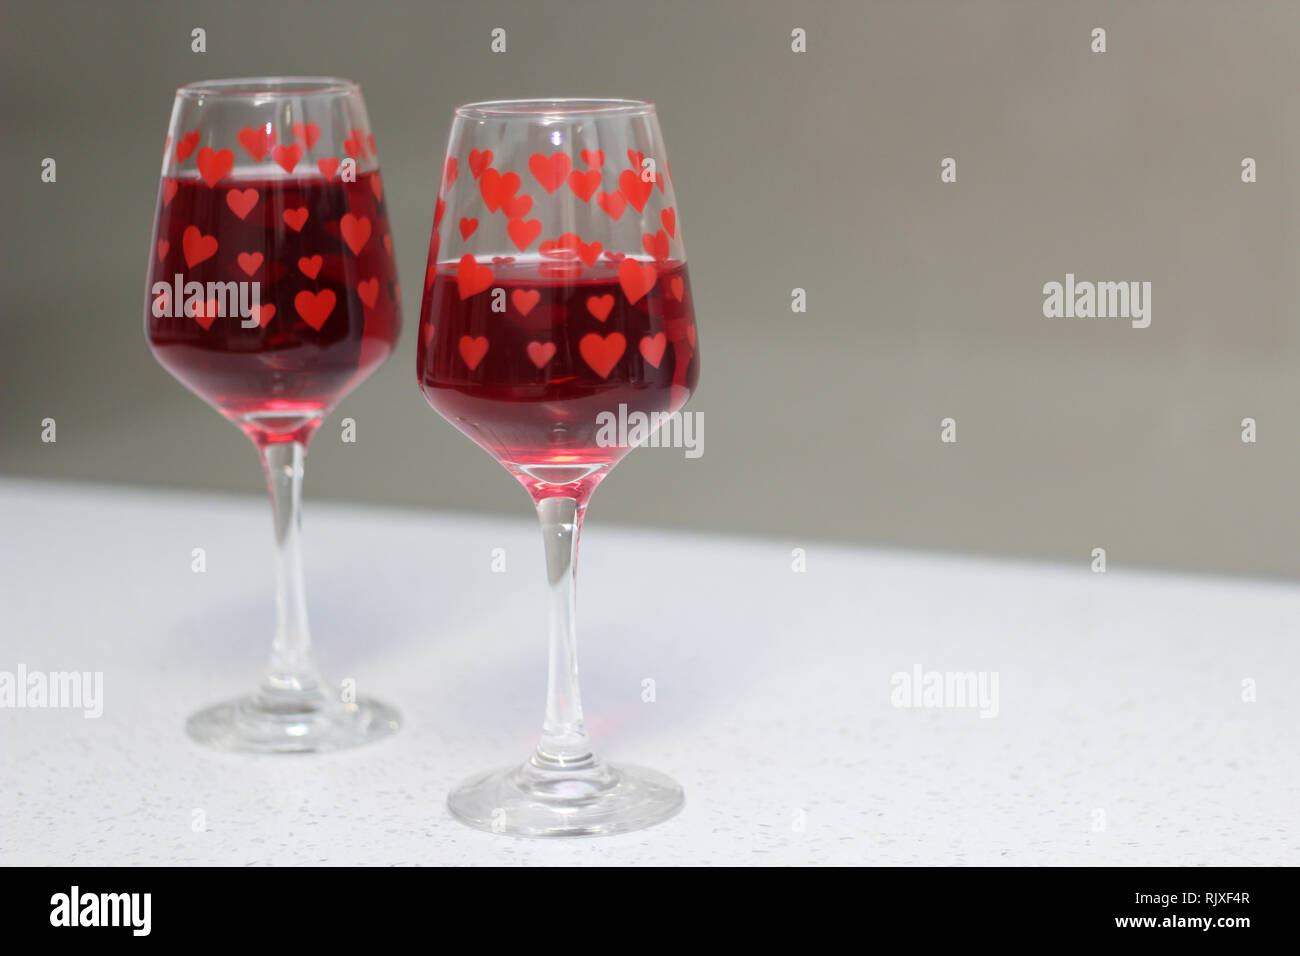 CARDIFF, WALES. 10th February 2017. wine glasses to represent romance Stock Photo